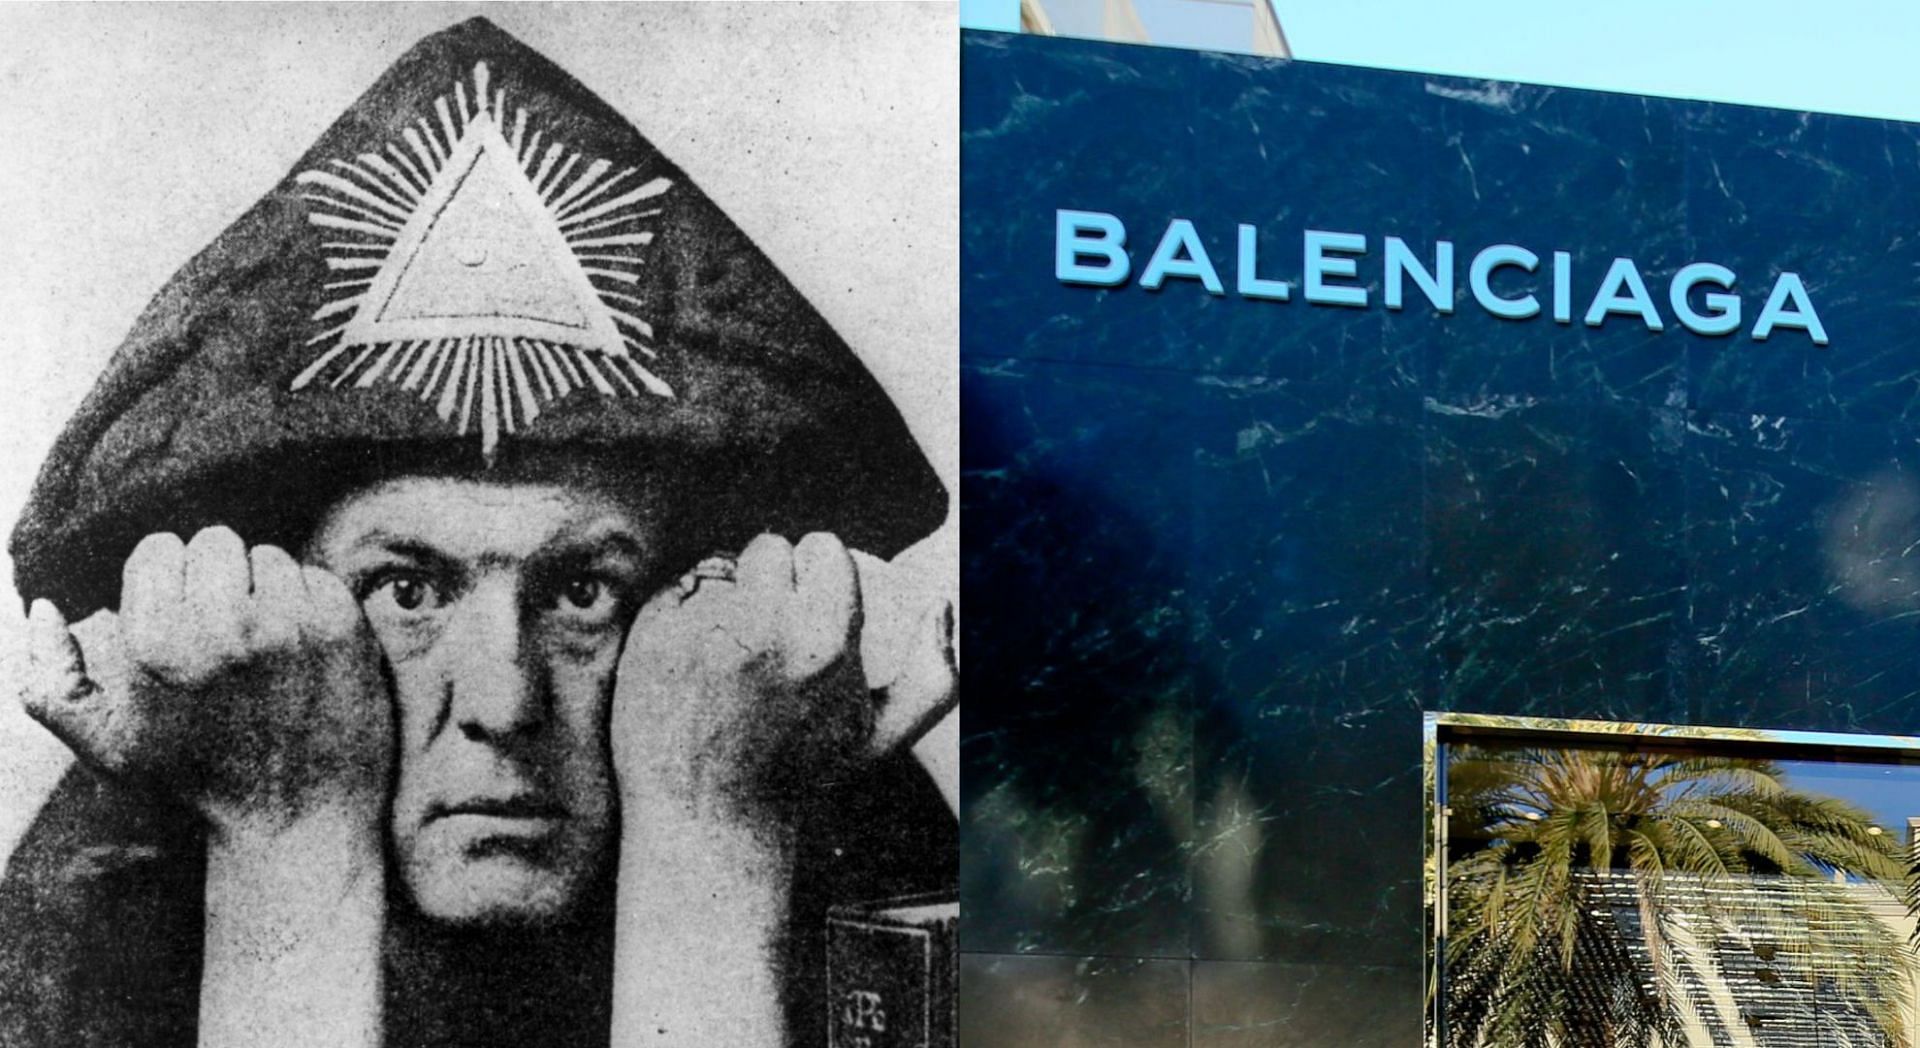 Conspiracy theorists claim that &quot;Balenciaga&quot; translates to &ldquo;do as though wilt&rdquo; in Latin, a motto for satanist Aleister Crowley